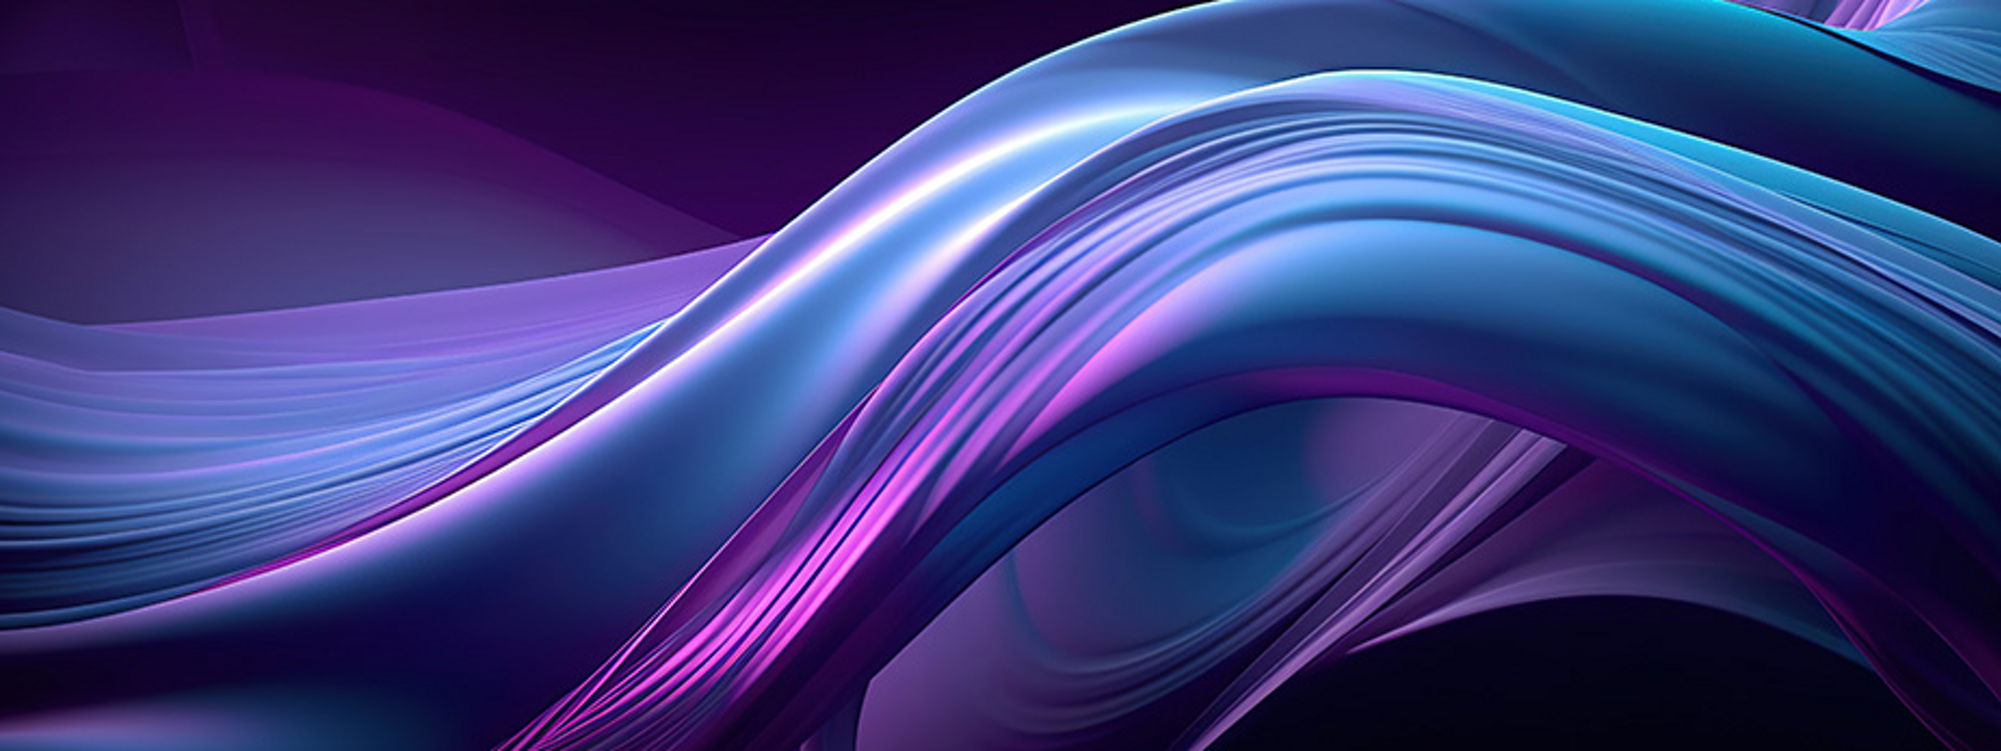 Wave of blue and purple colors